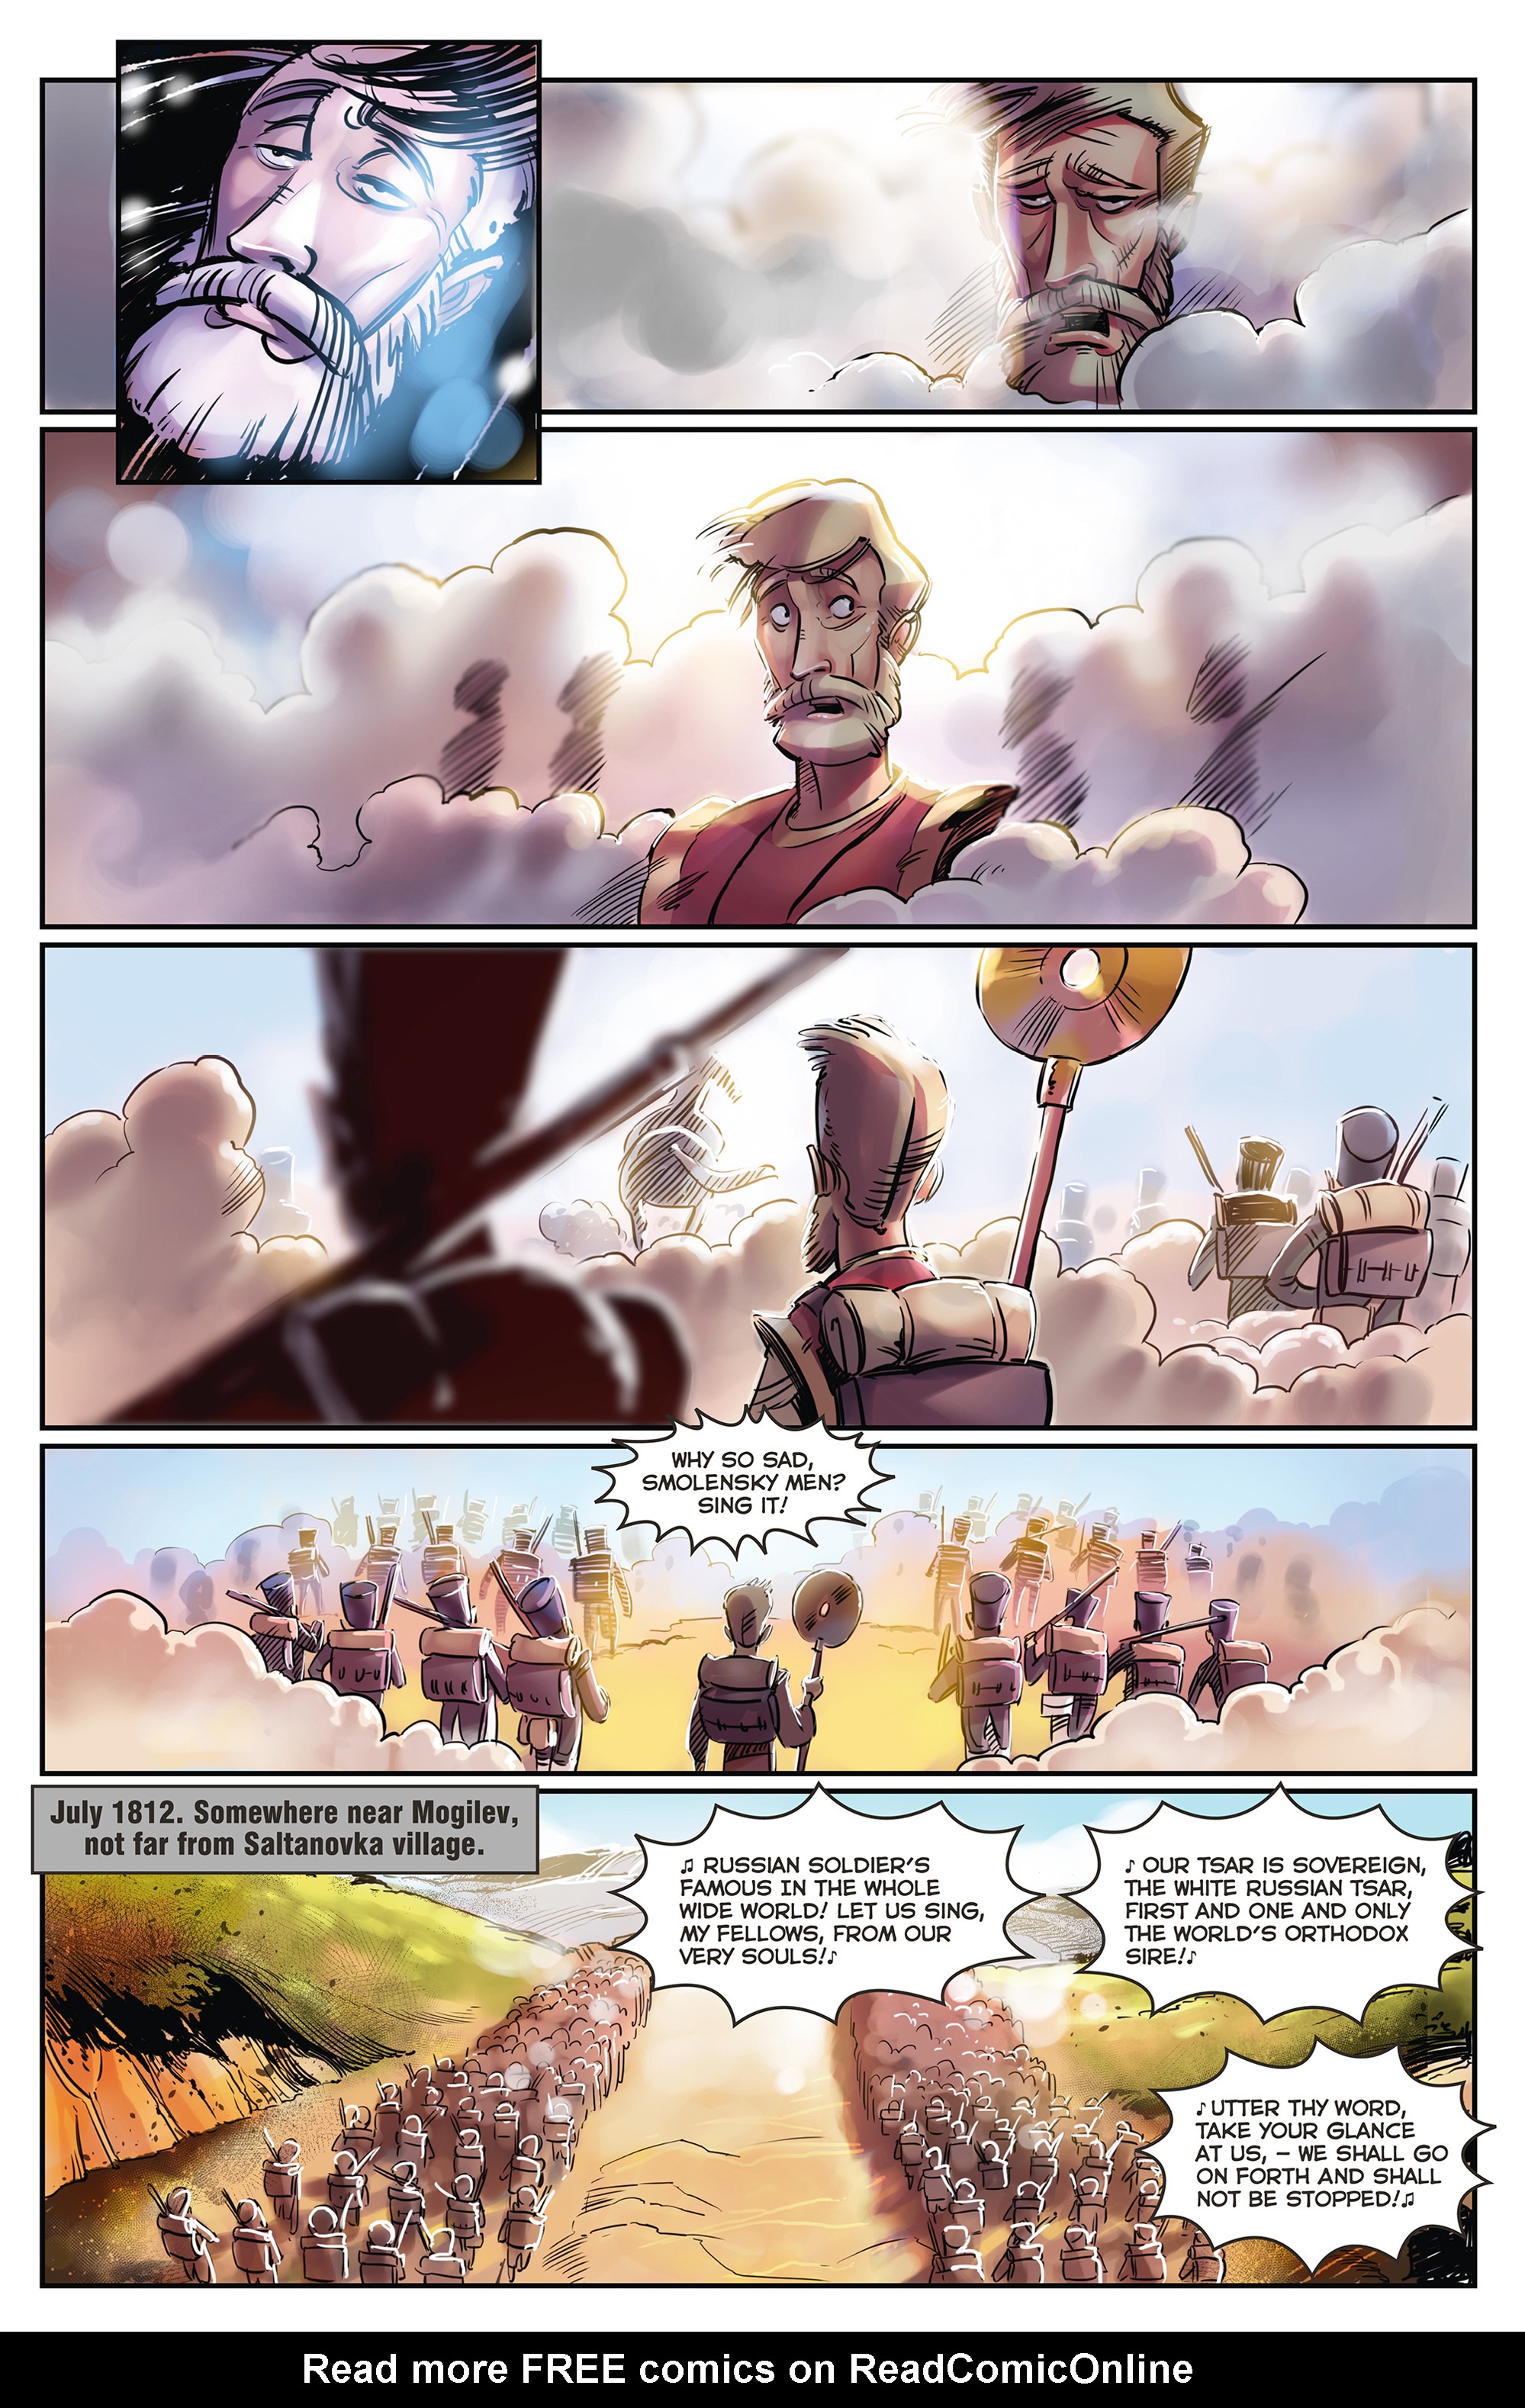 Read online Friar comic -  Issue #6 - 12